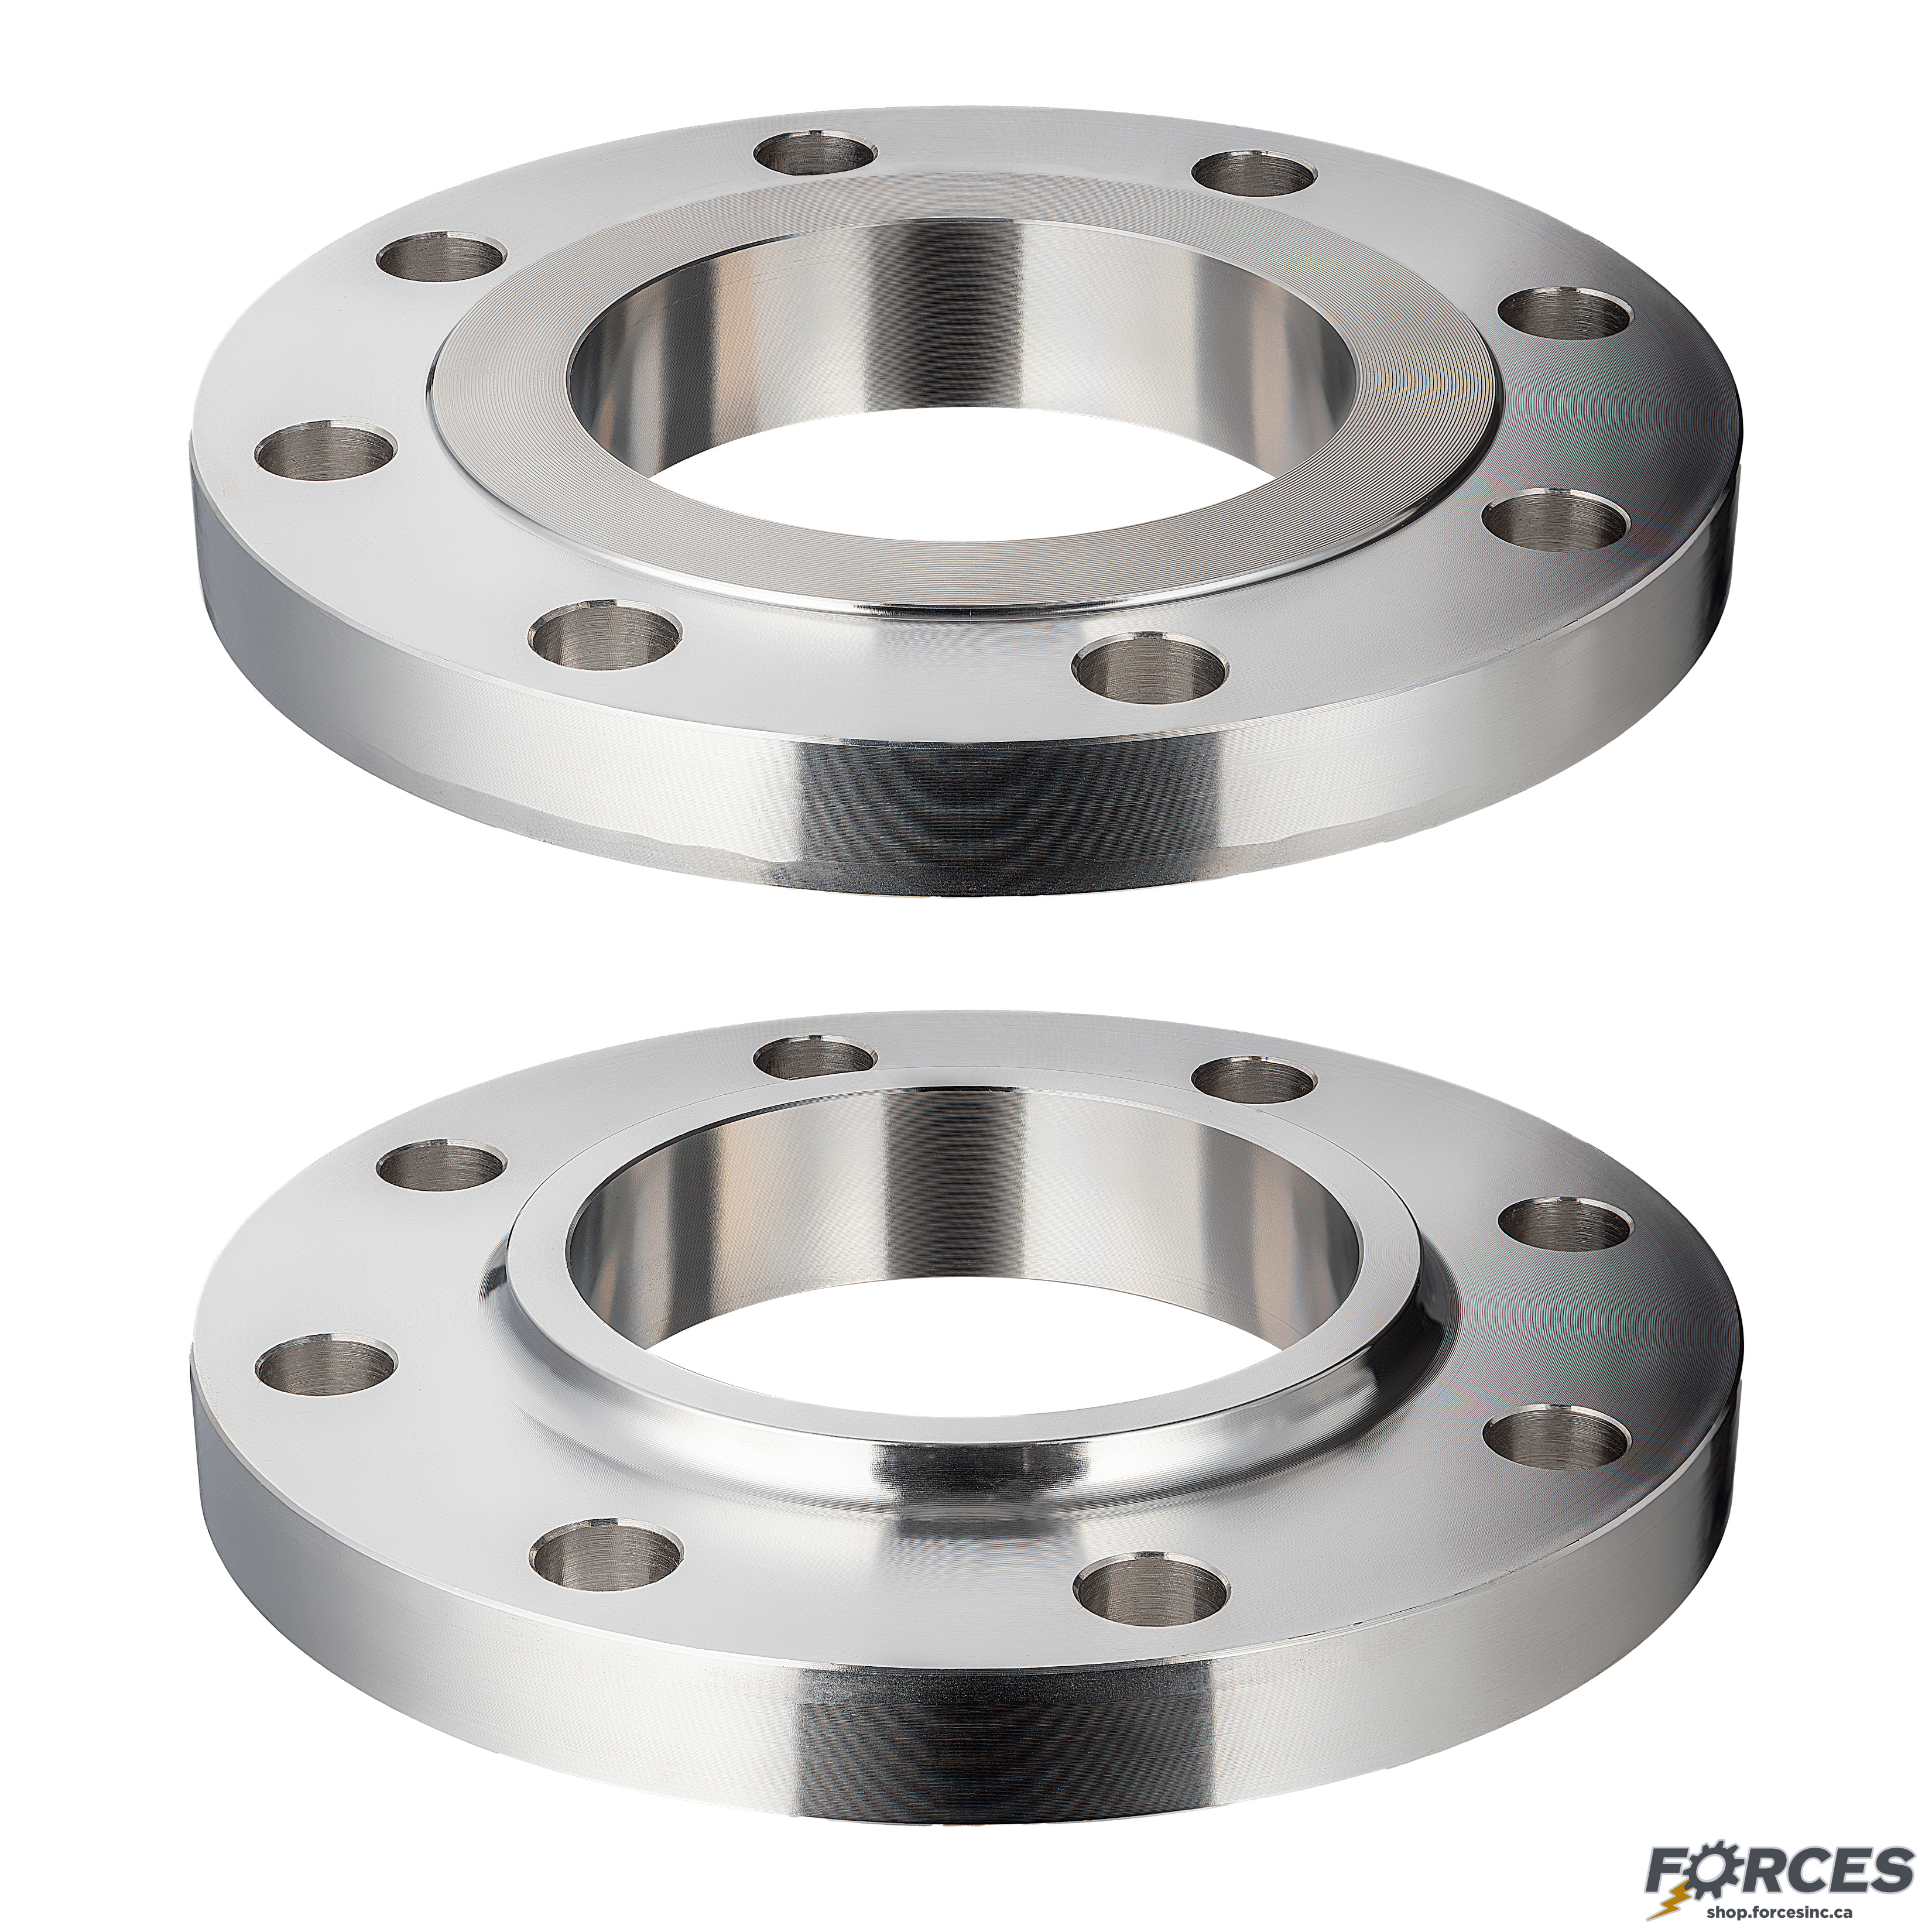 6" Slip-On Flange Class #150 - Stainless Steel 316 - Forces Inc